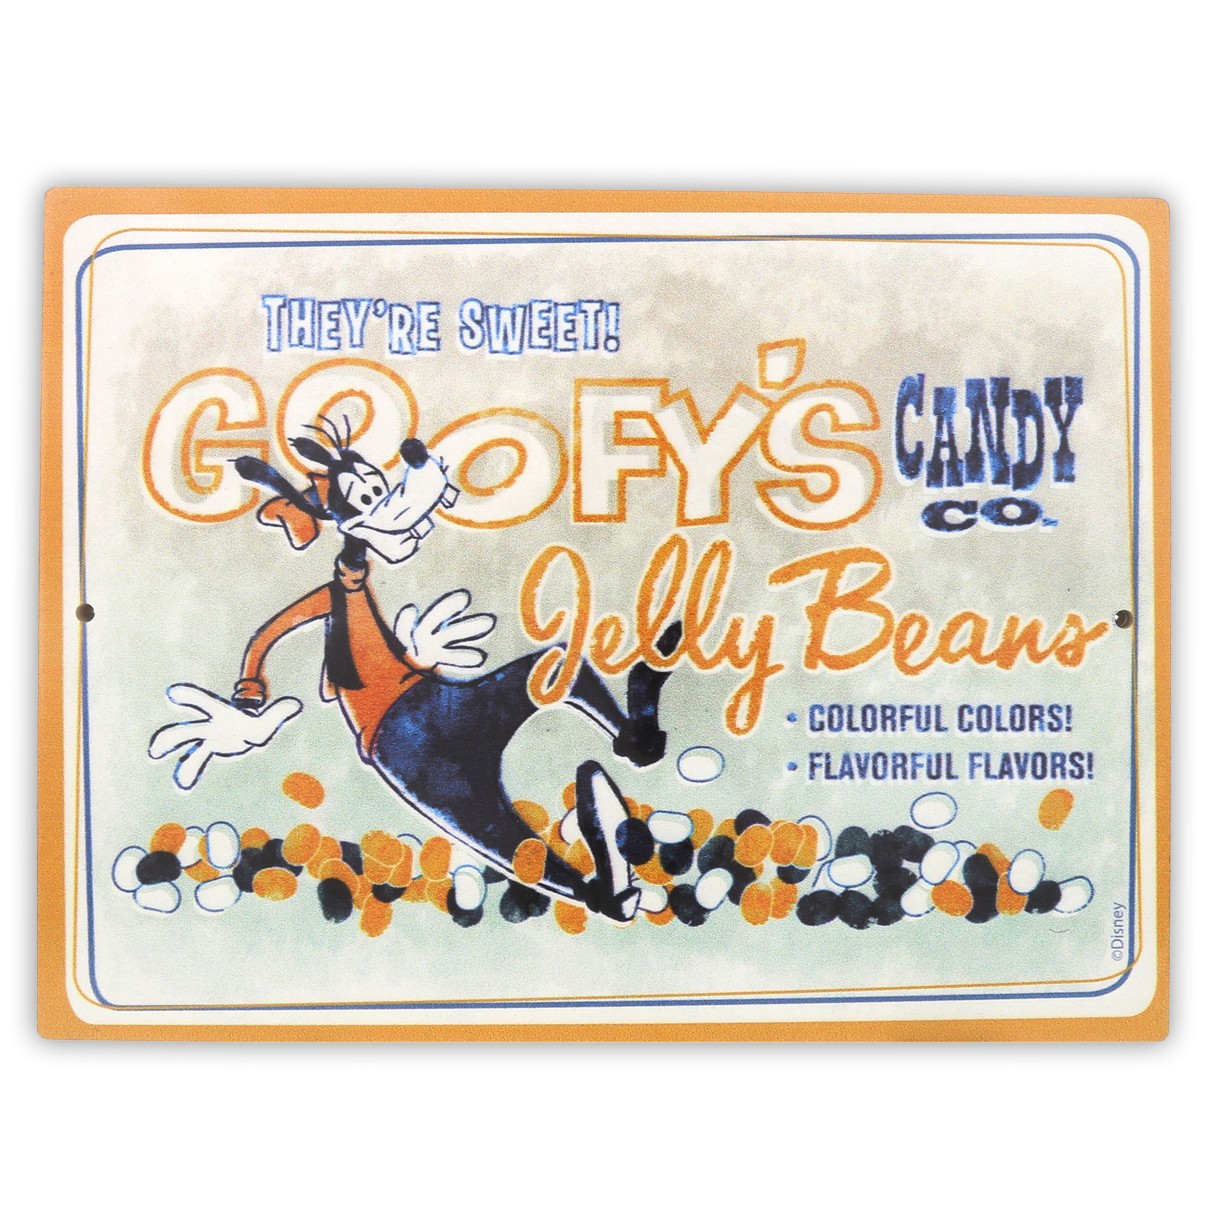 Goofy's Candy Co. Jelly Beans Wall Sign